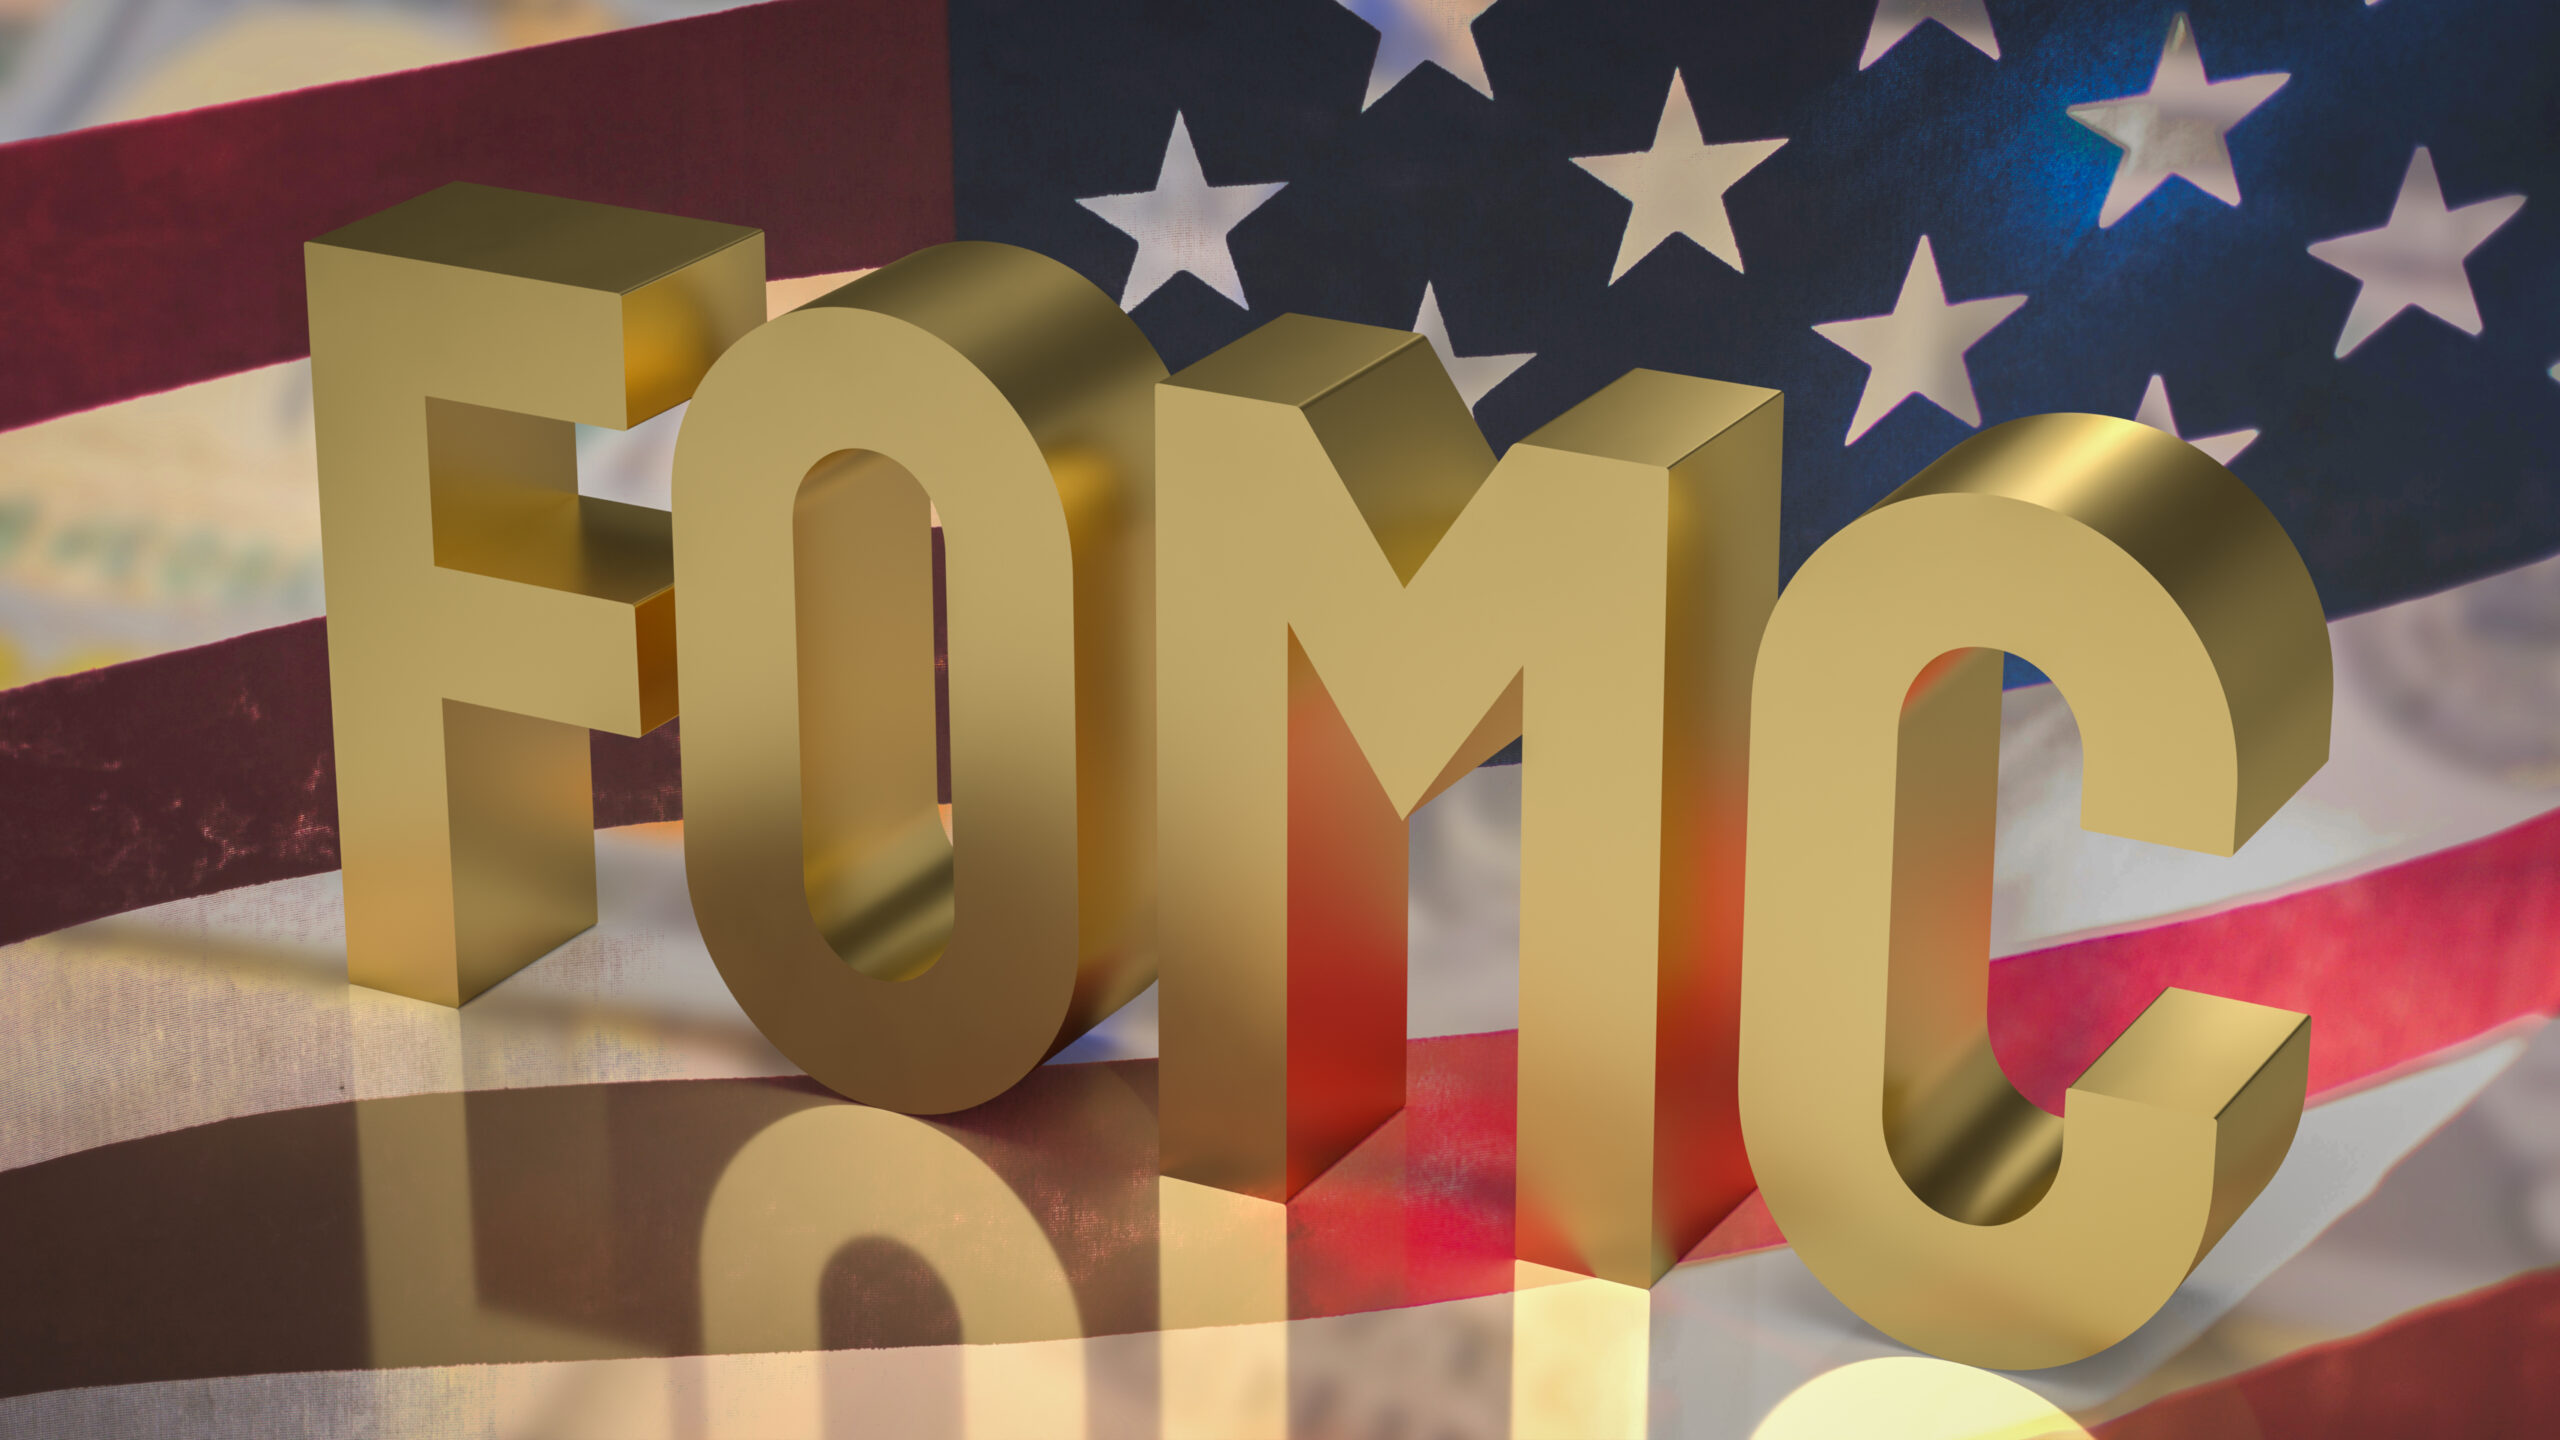 gold text fomc federal open market committee business concept 3d rendering scaled 돈 버는 모든 방법